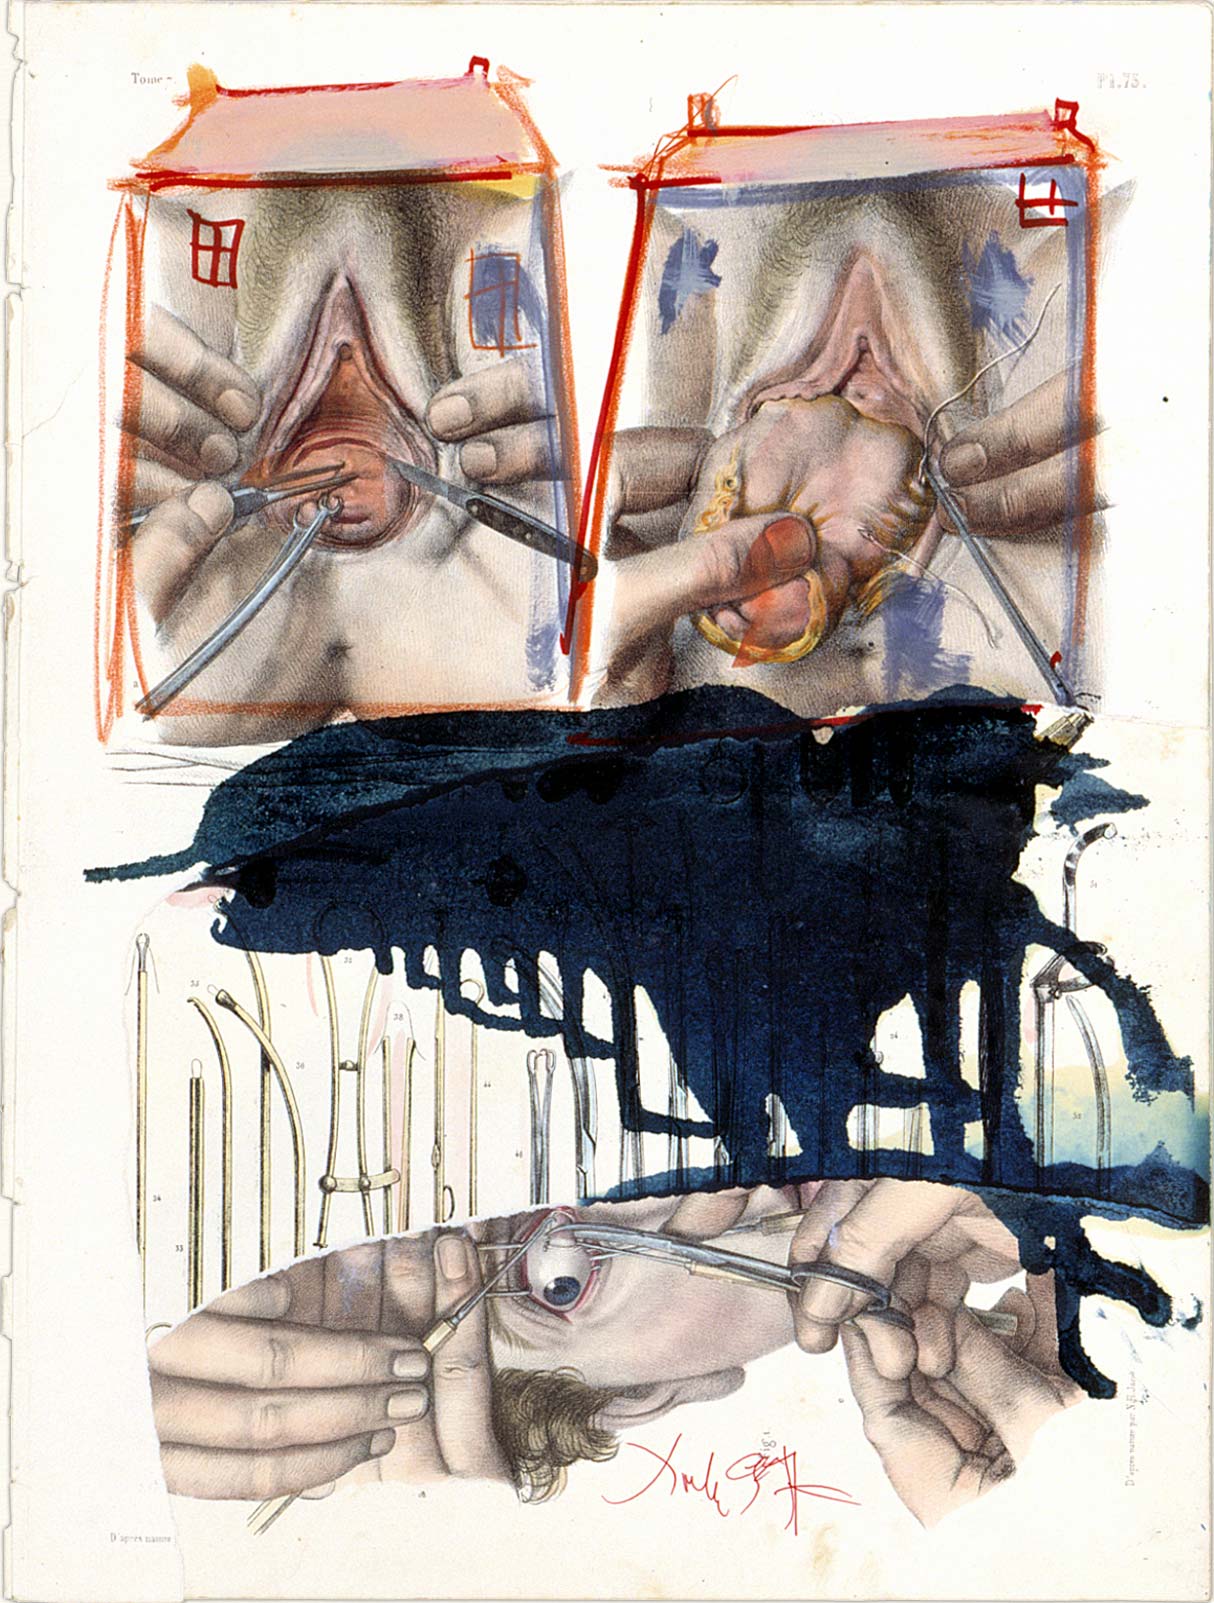 Dado’s collage: Untitled, 1997